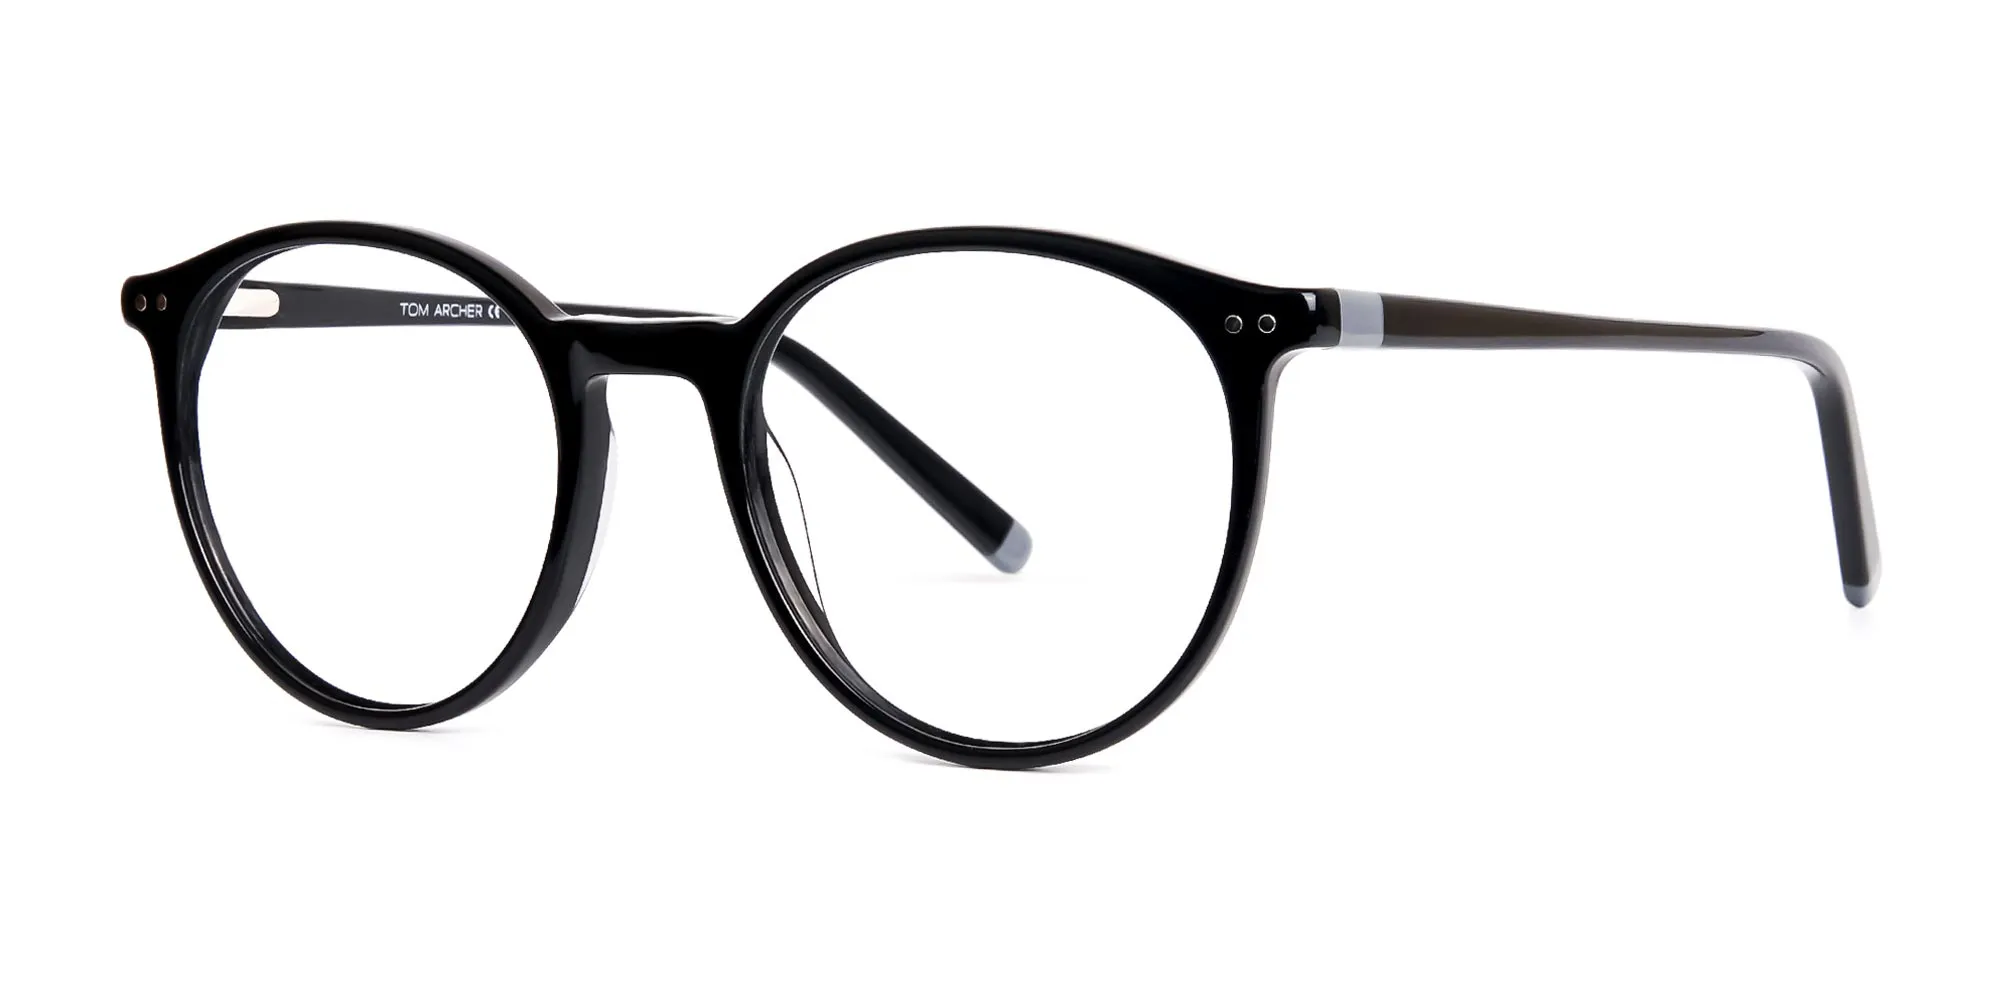 black and silver round glasses frames-2